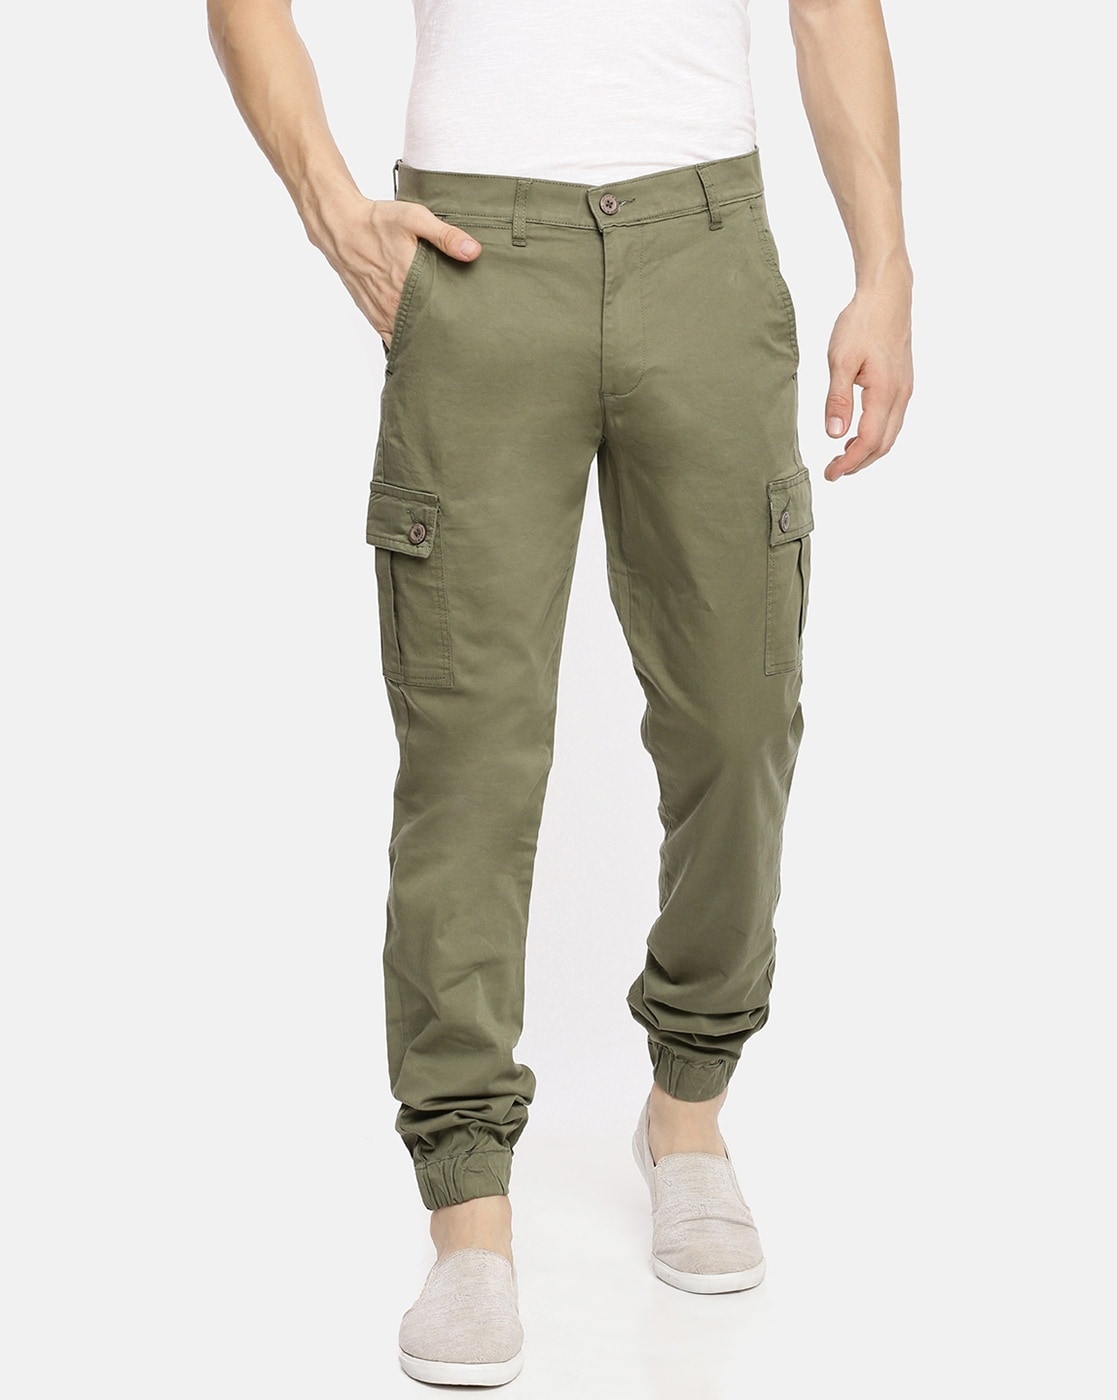 Buy The Indian Garage Co. The Indian Garage Co Relaxed Chinos Trousers at  Redfynd